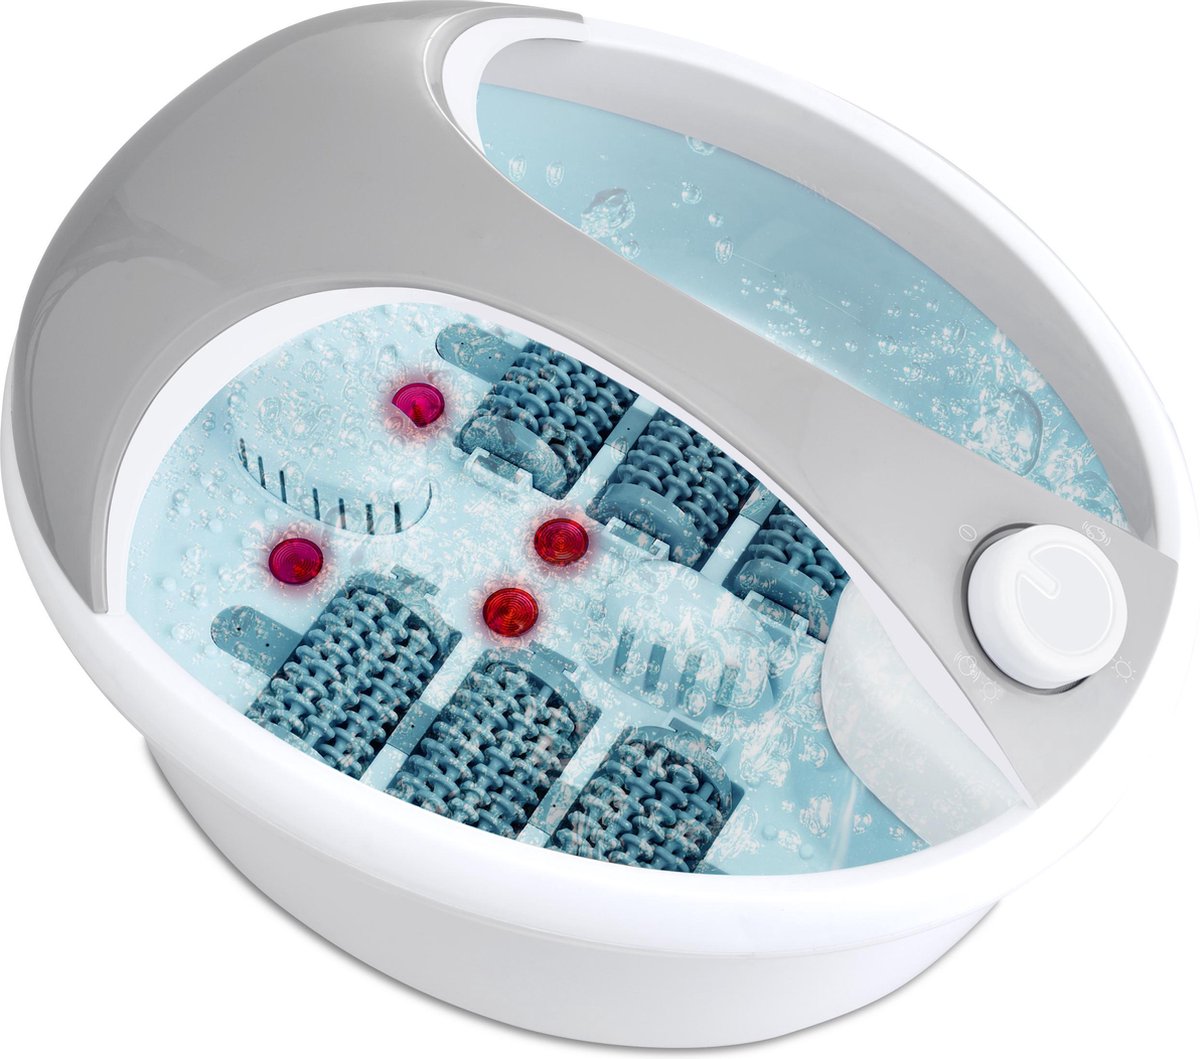 Rio FTBH Deluxe Foot Spa & Massager - Wit